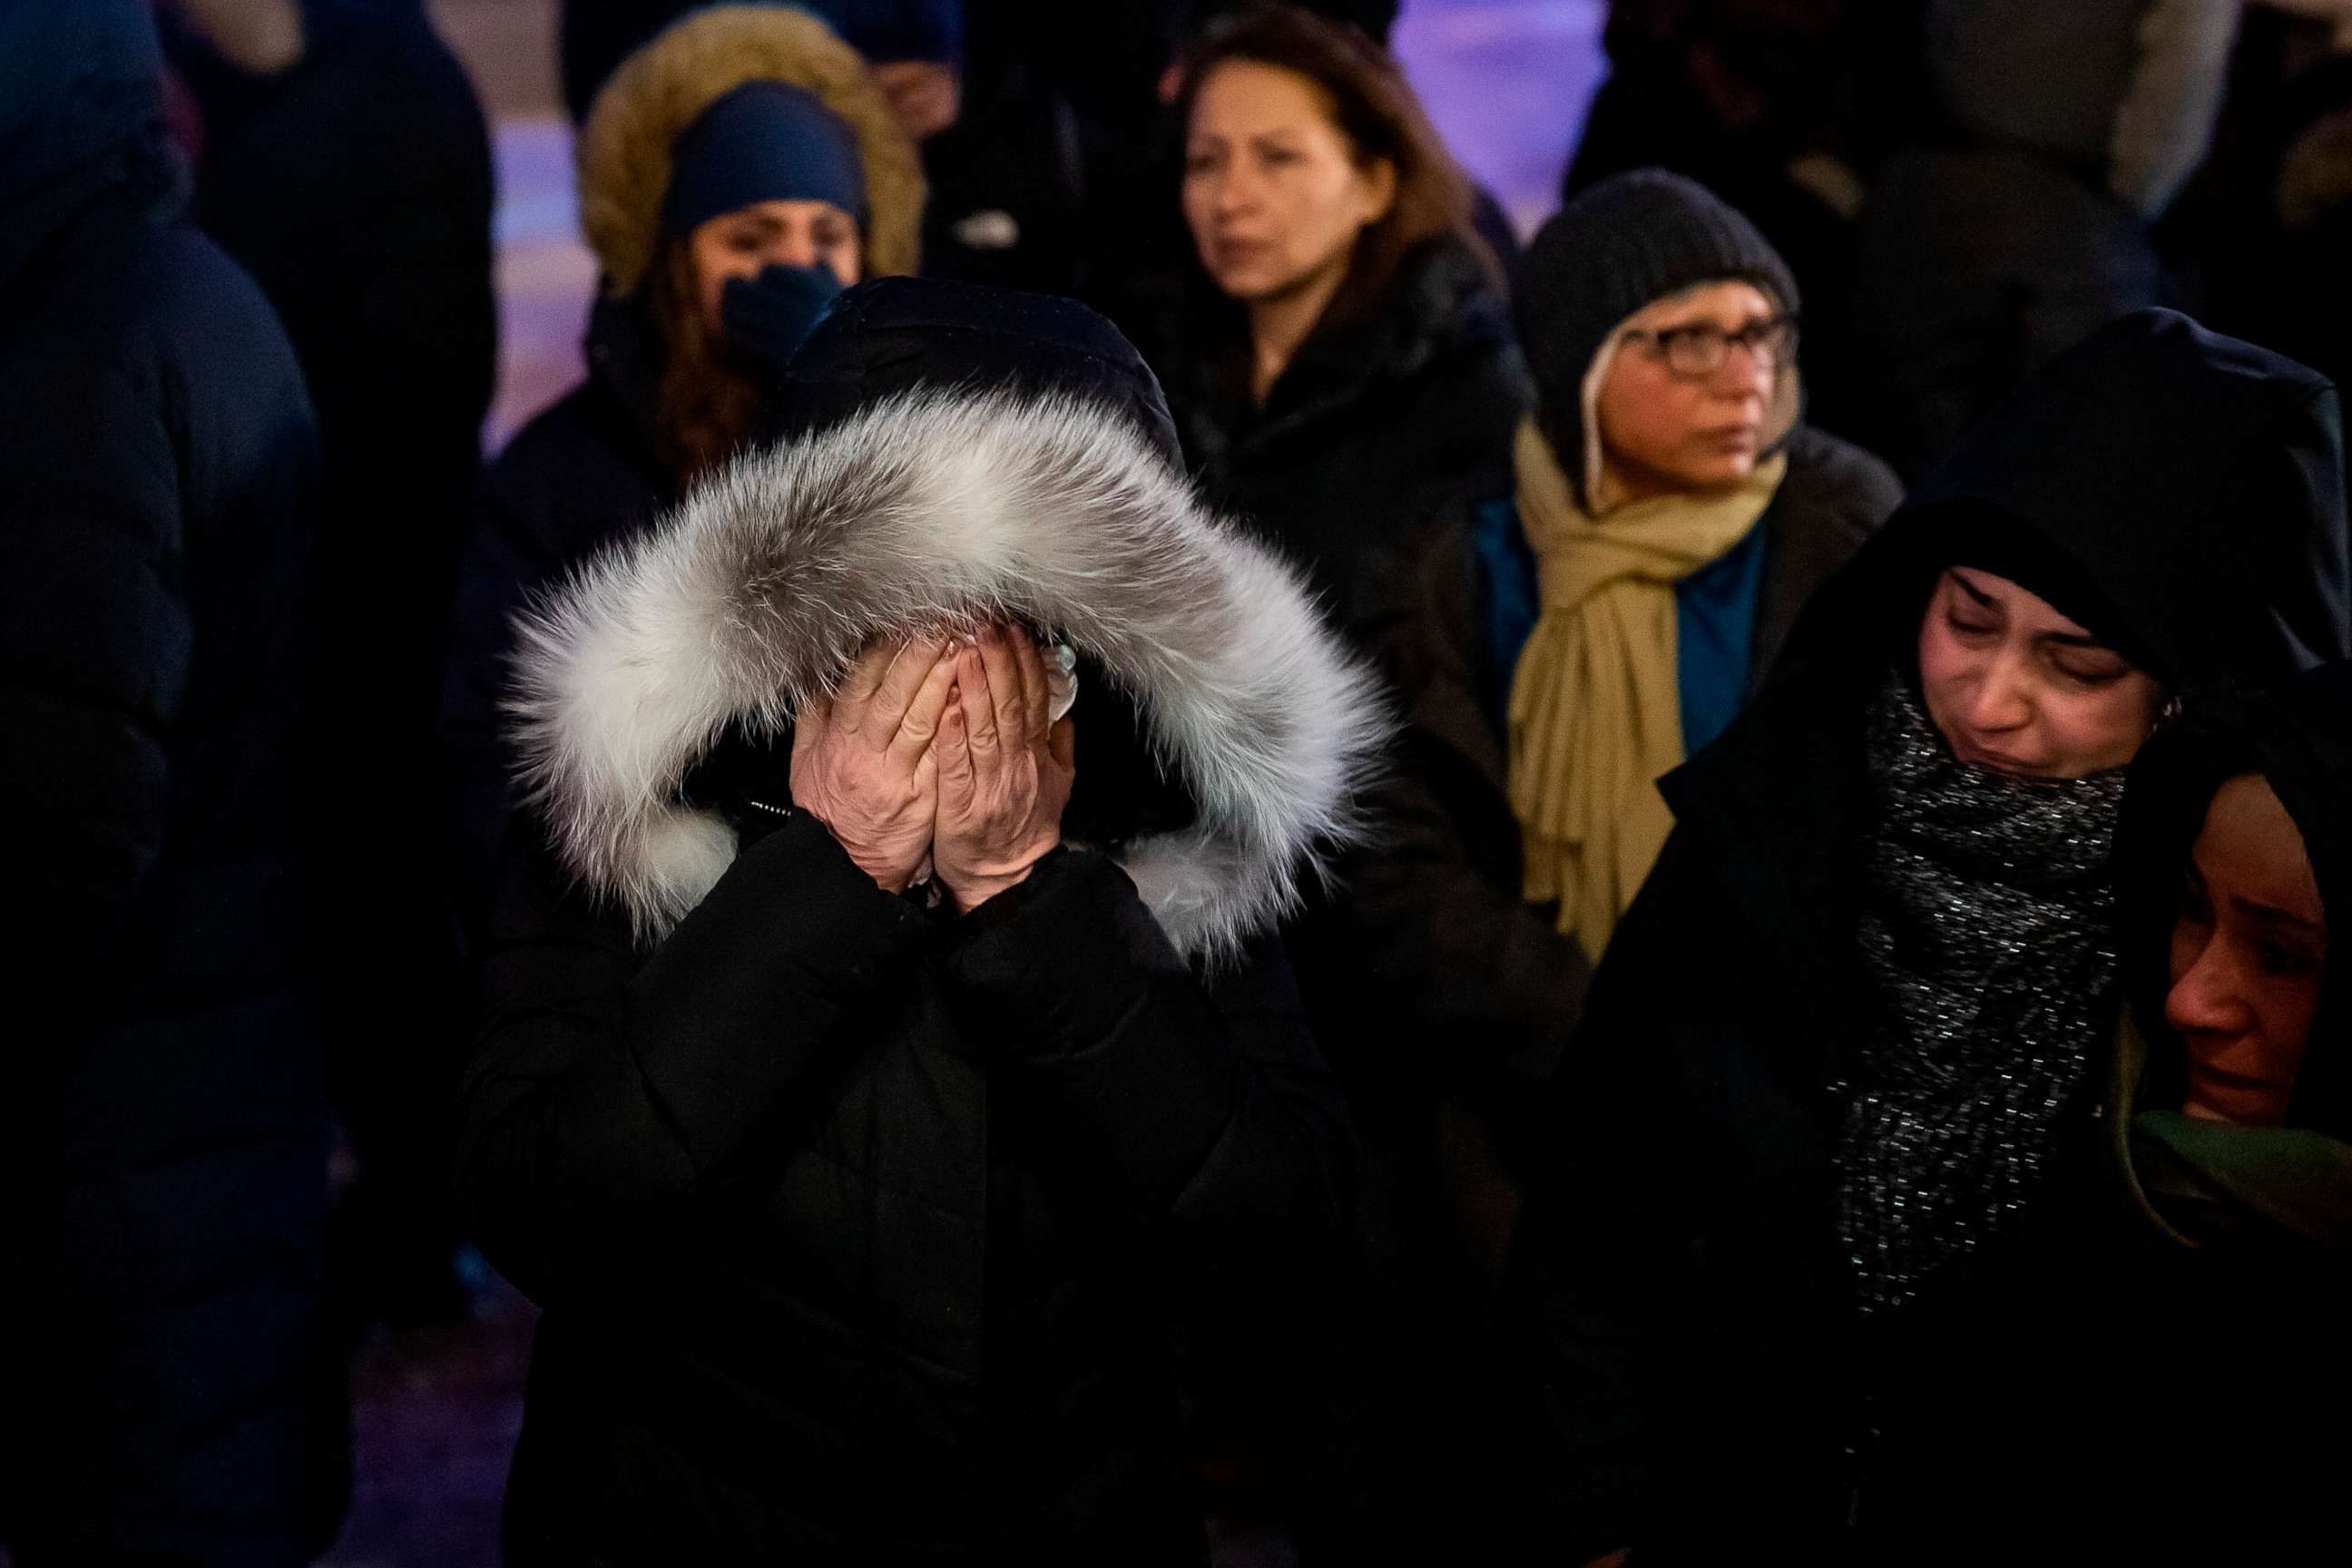 PHOTO: A woman mourns outside the Alberta Legislature Building in Edmonton, Alberta, Wednesday, Jan. 8, 2020, during a vigil for those killed after a Ukrainian passenger jet crashed, killing at least 63 Canadians.